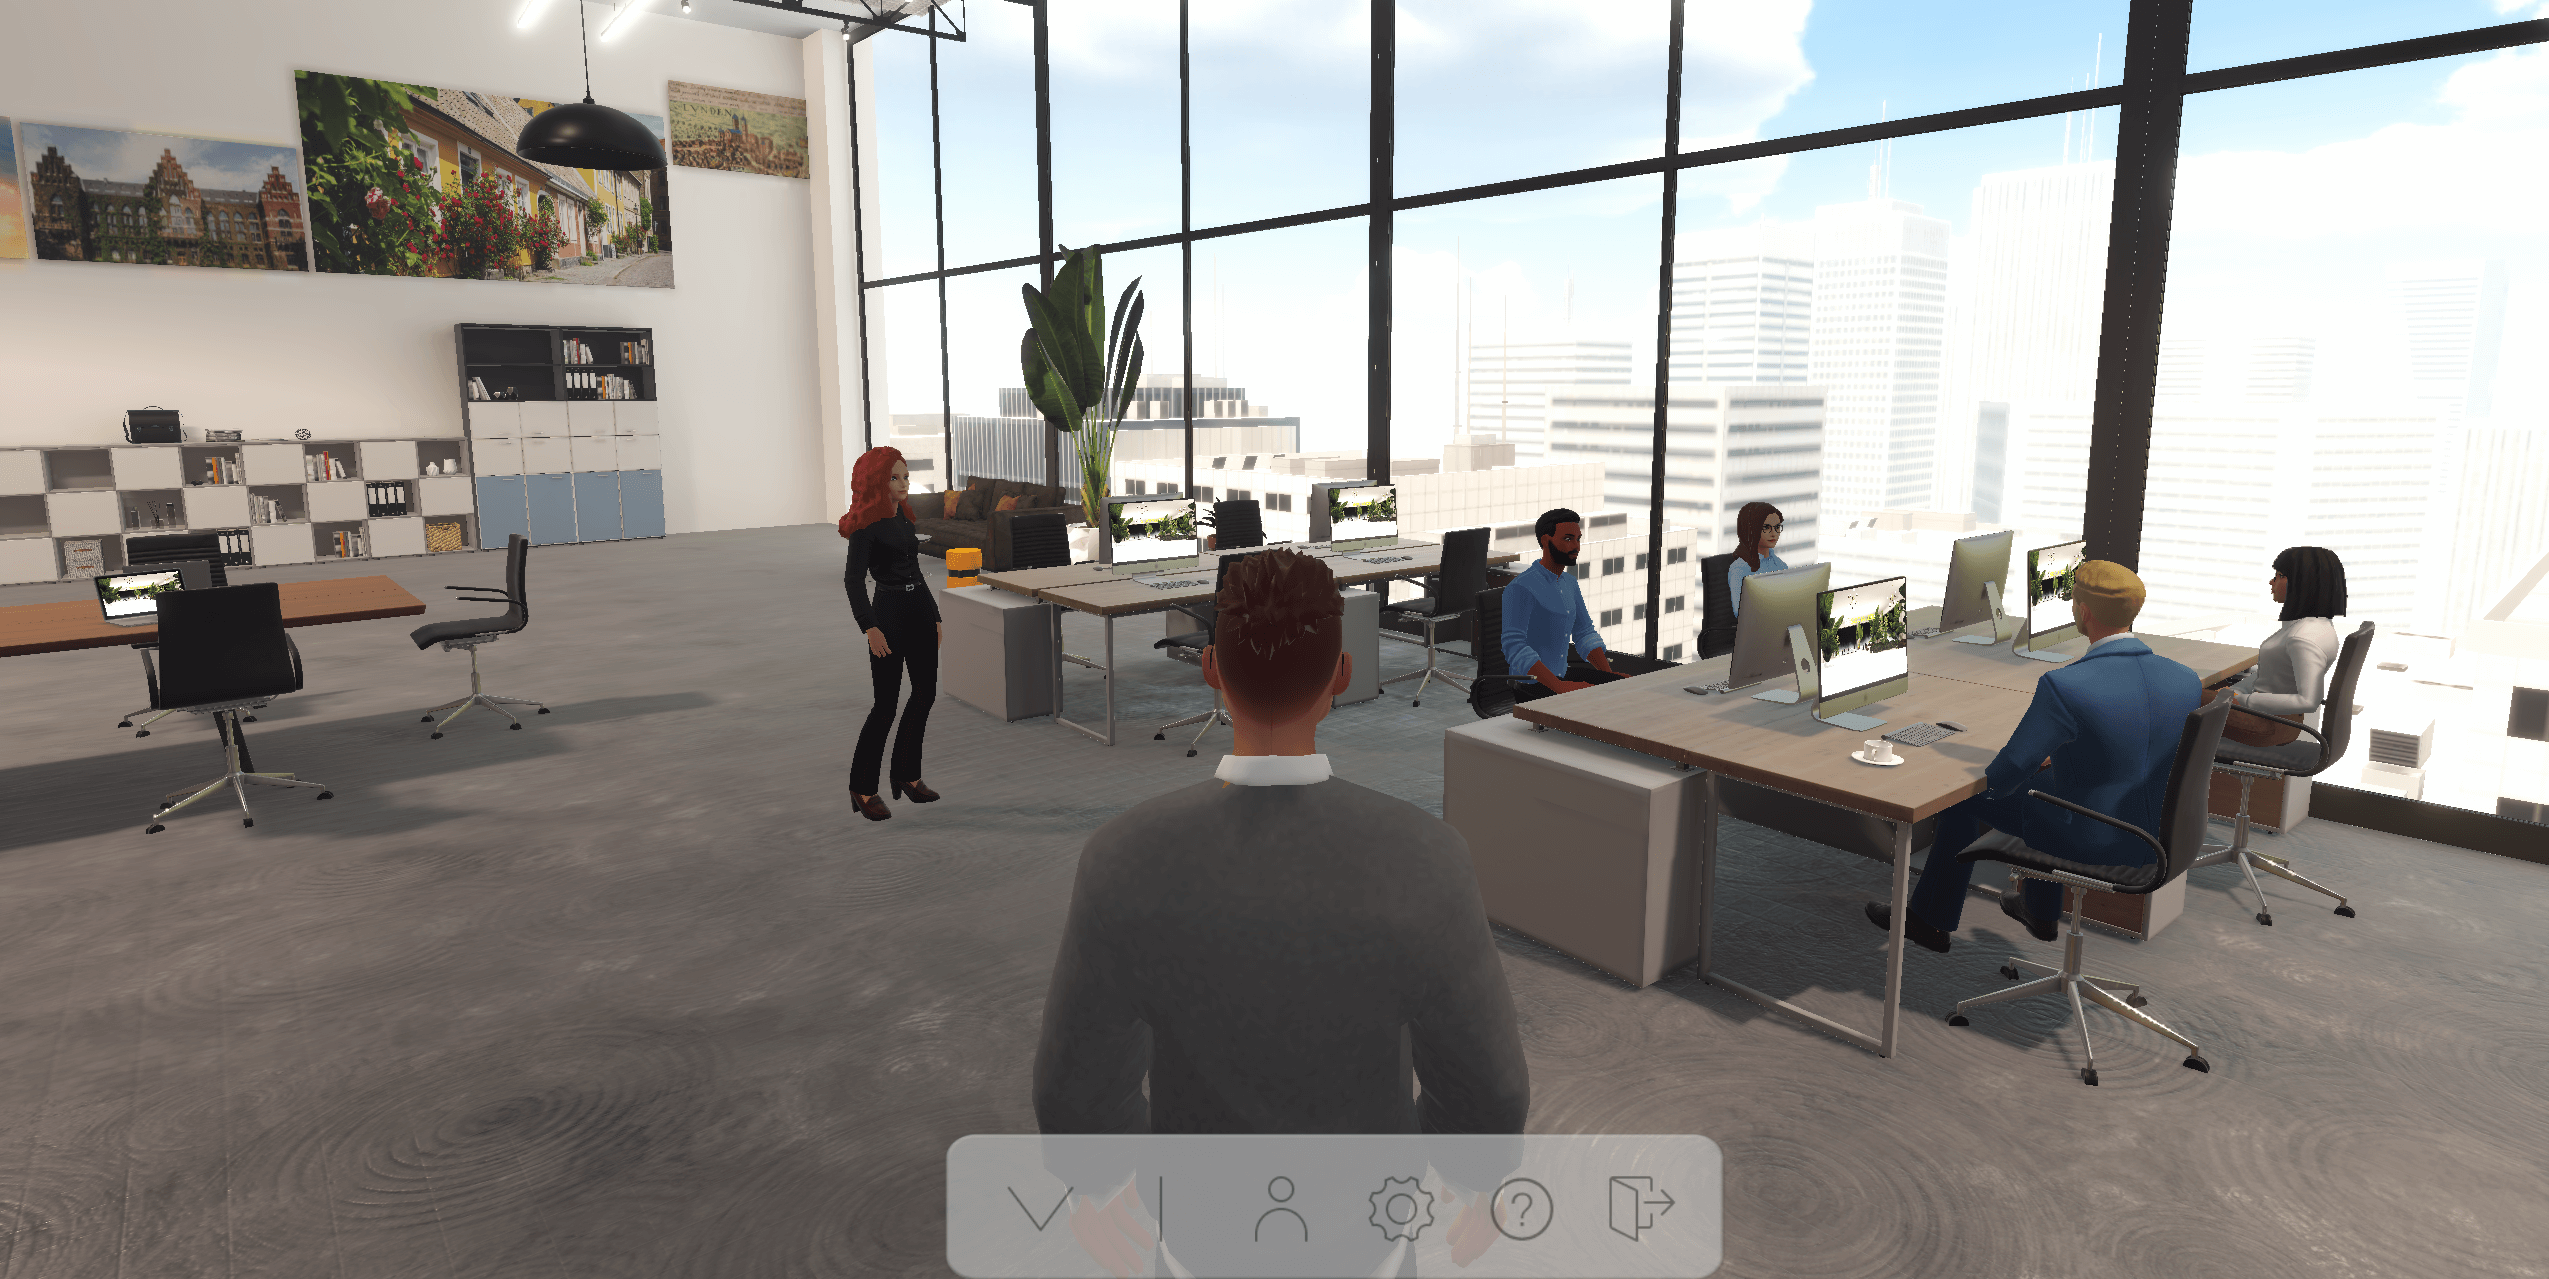 Online co-working space or virtual office. Avatars working in groups in the ReSocialize metaverse meeting platform. Some avatars are sitting at desks with computers, others are standing and having conversations. The environment is light and inspiring environment, floor-to-ceiling windows at the far wall, and several desks, meeting tables, and couch areas ready for online networking events and remote work. perfect digital nomad tool to empower networking in when working alone or remote. Plans and pricing, this image highlights the ReSocialize xxx offering.